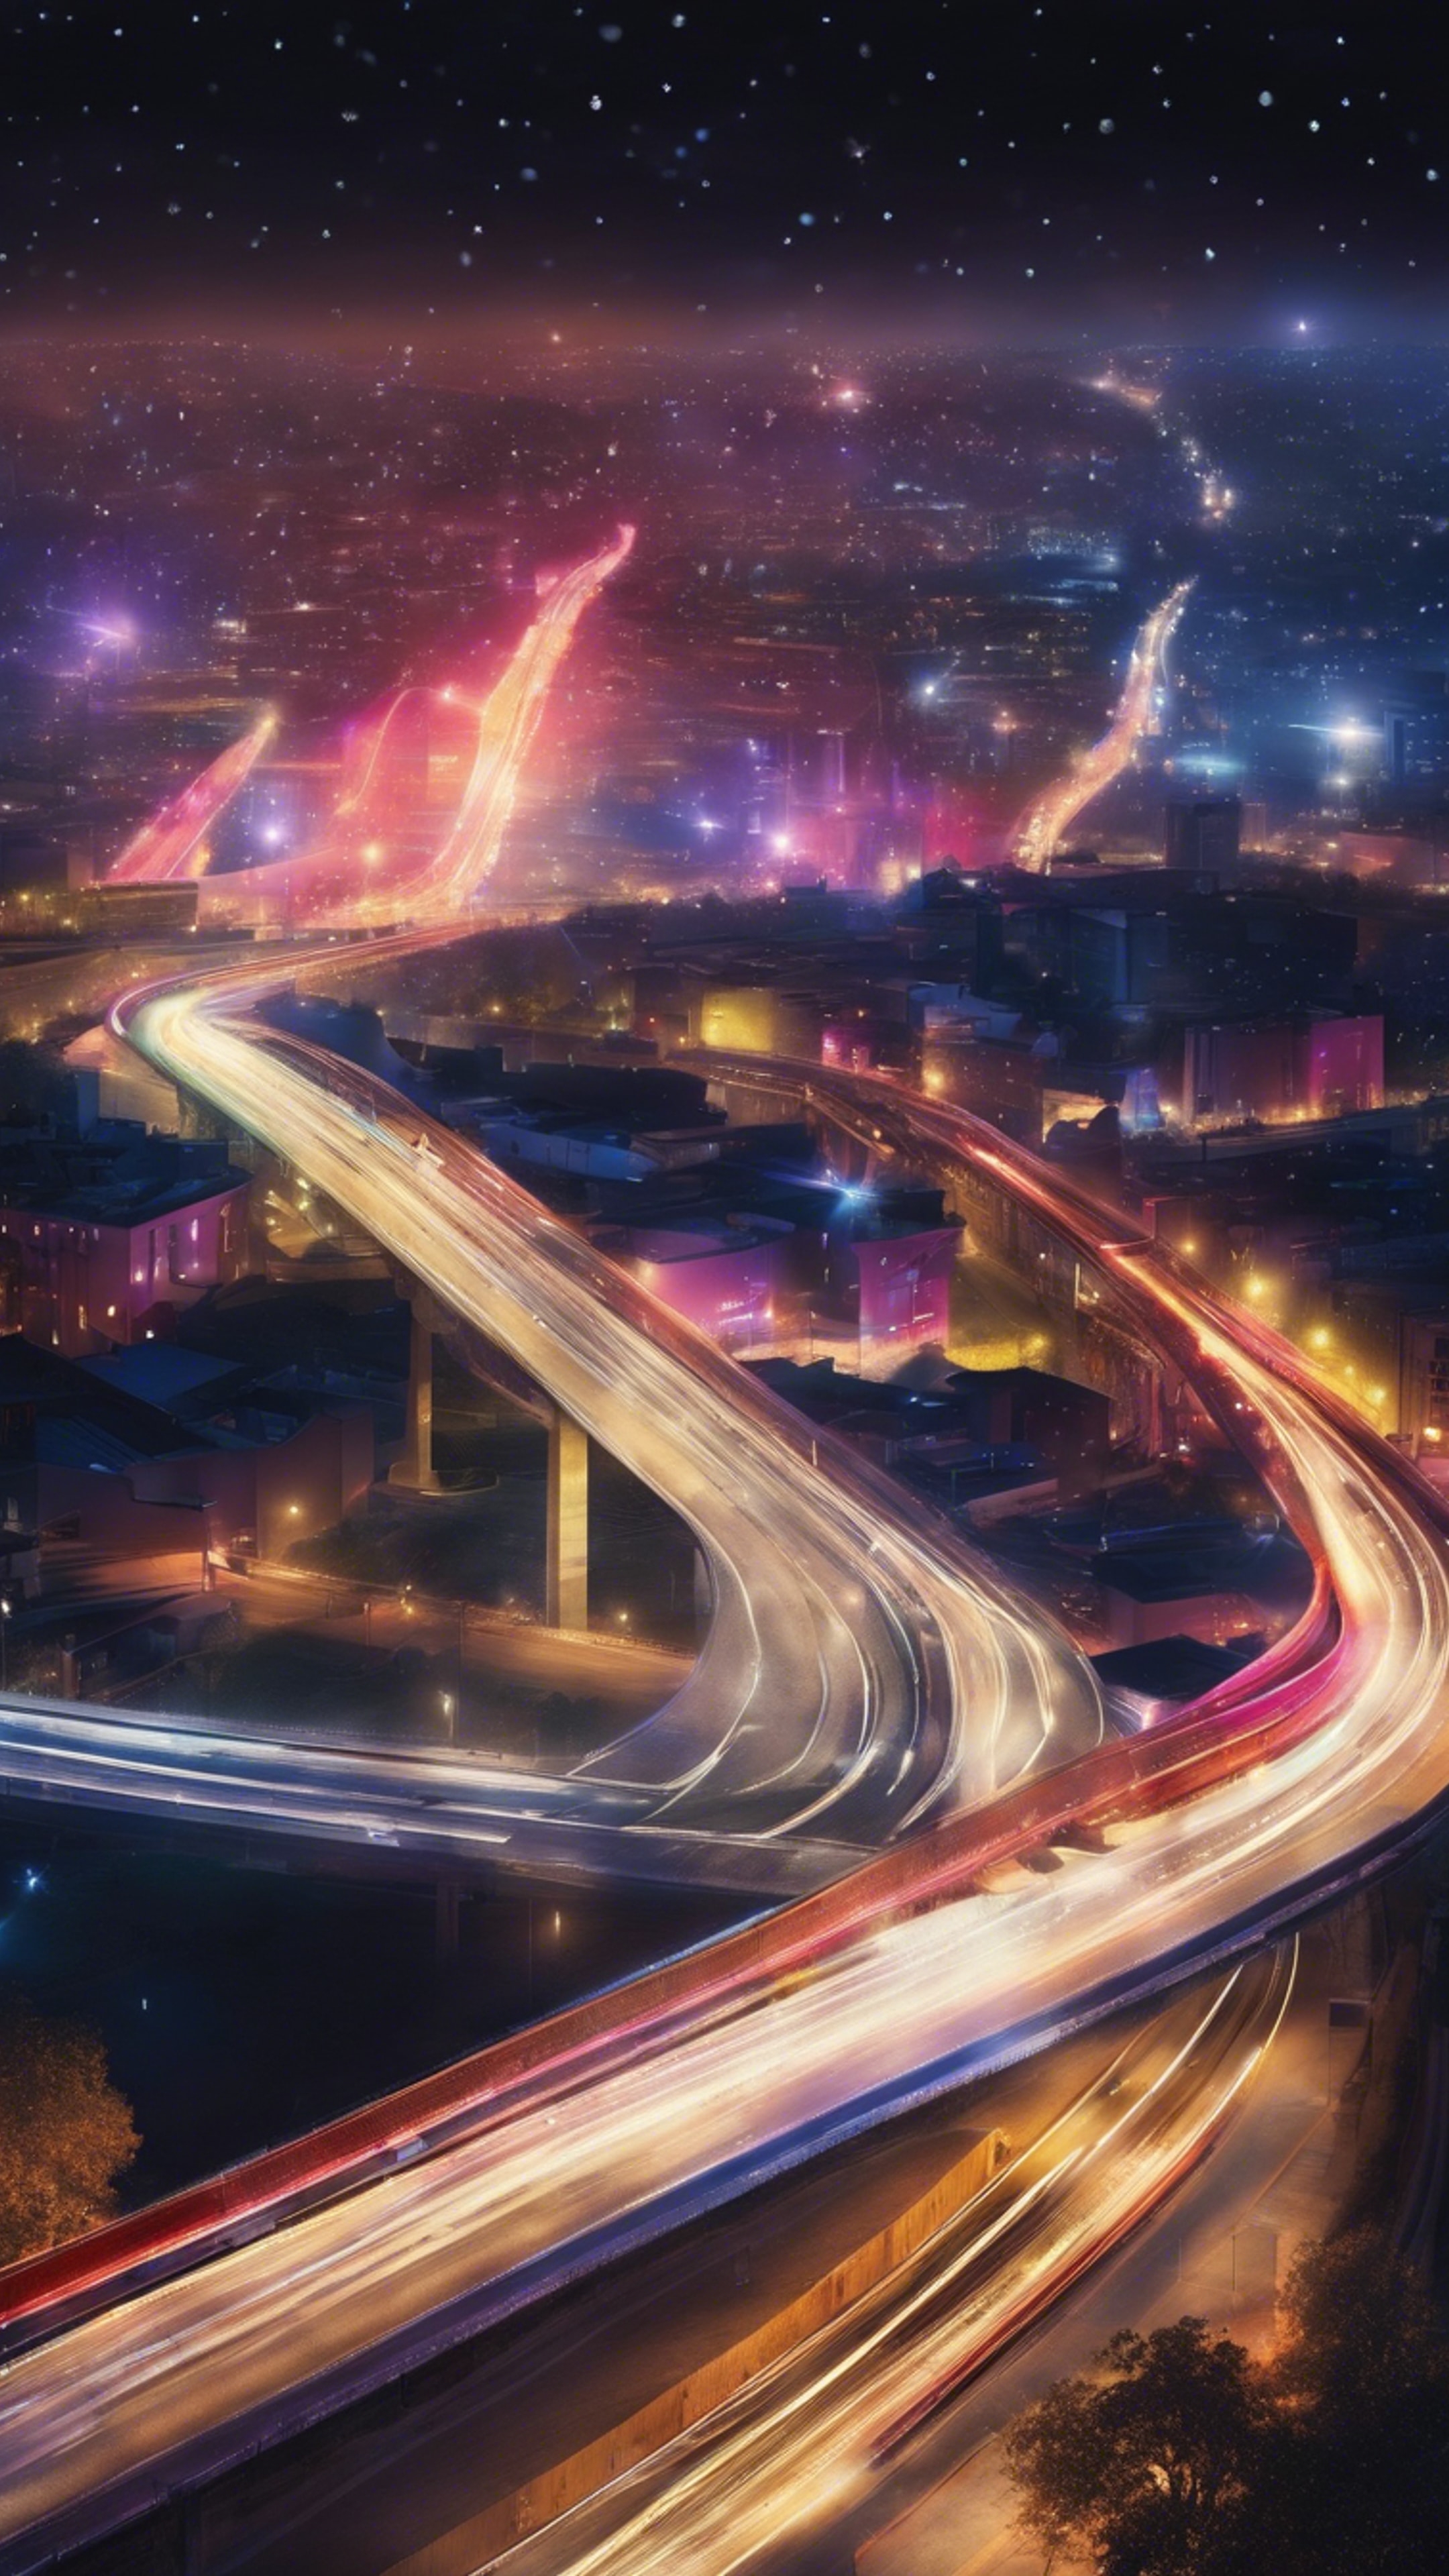 A lustrous highway painting a ribbon of light through the city under the vivid colors of a nocturnal sky. Papel de parede[7f6125f7f59b411d957d]